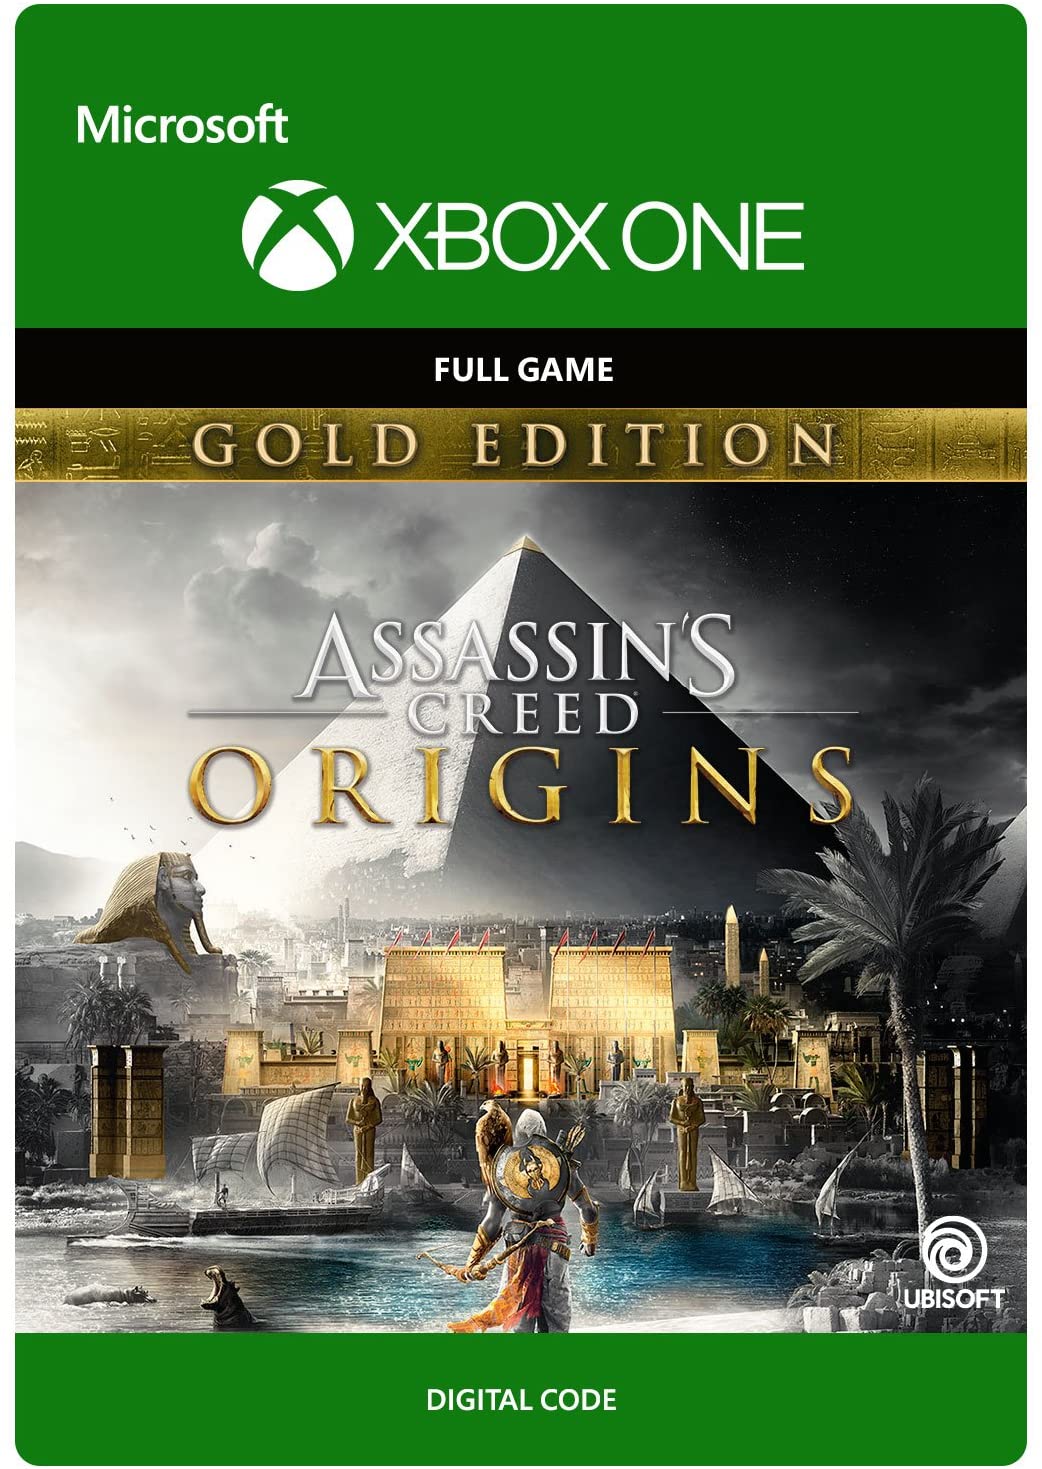 Assassin's Creed Origins Gold Edition Digital Download Key (Xbox One): Europe